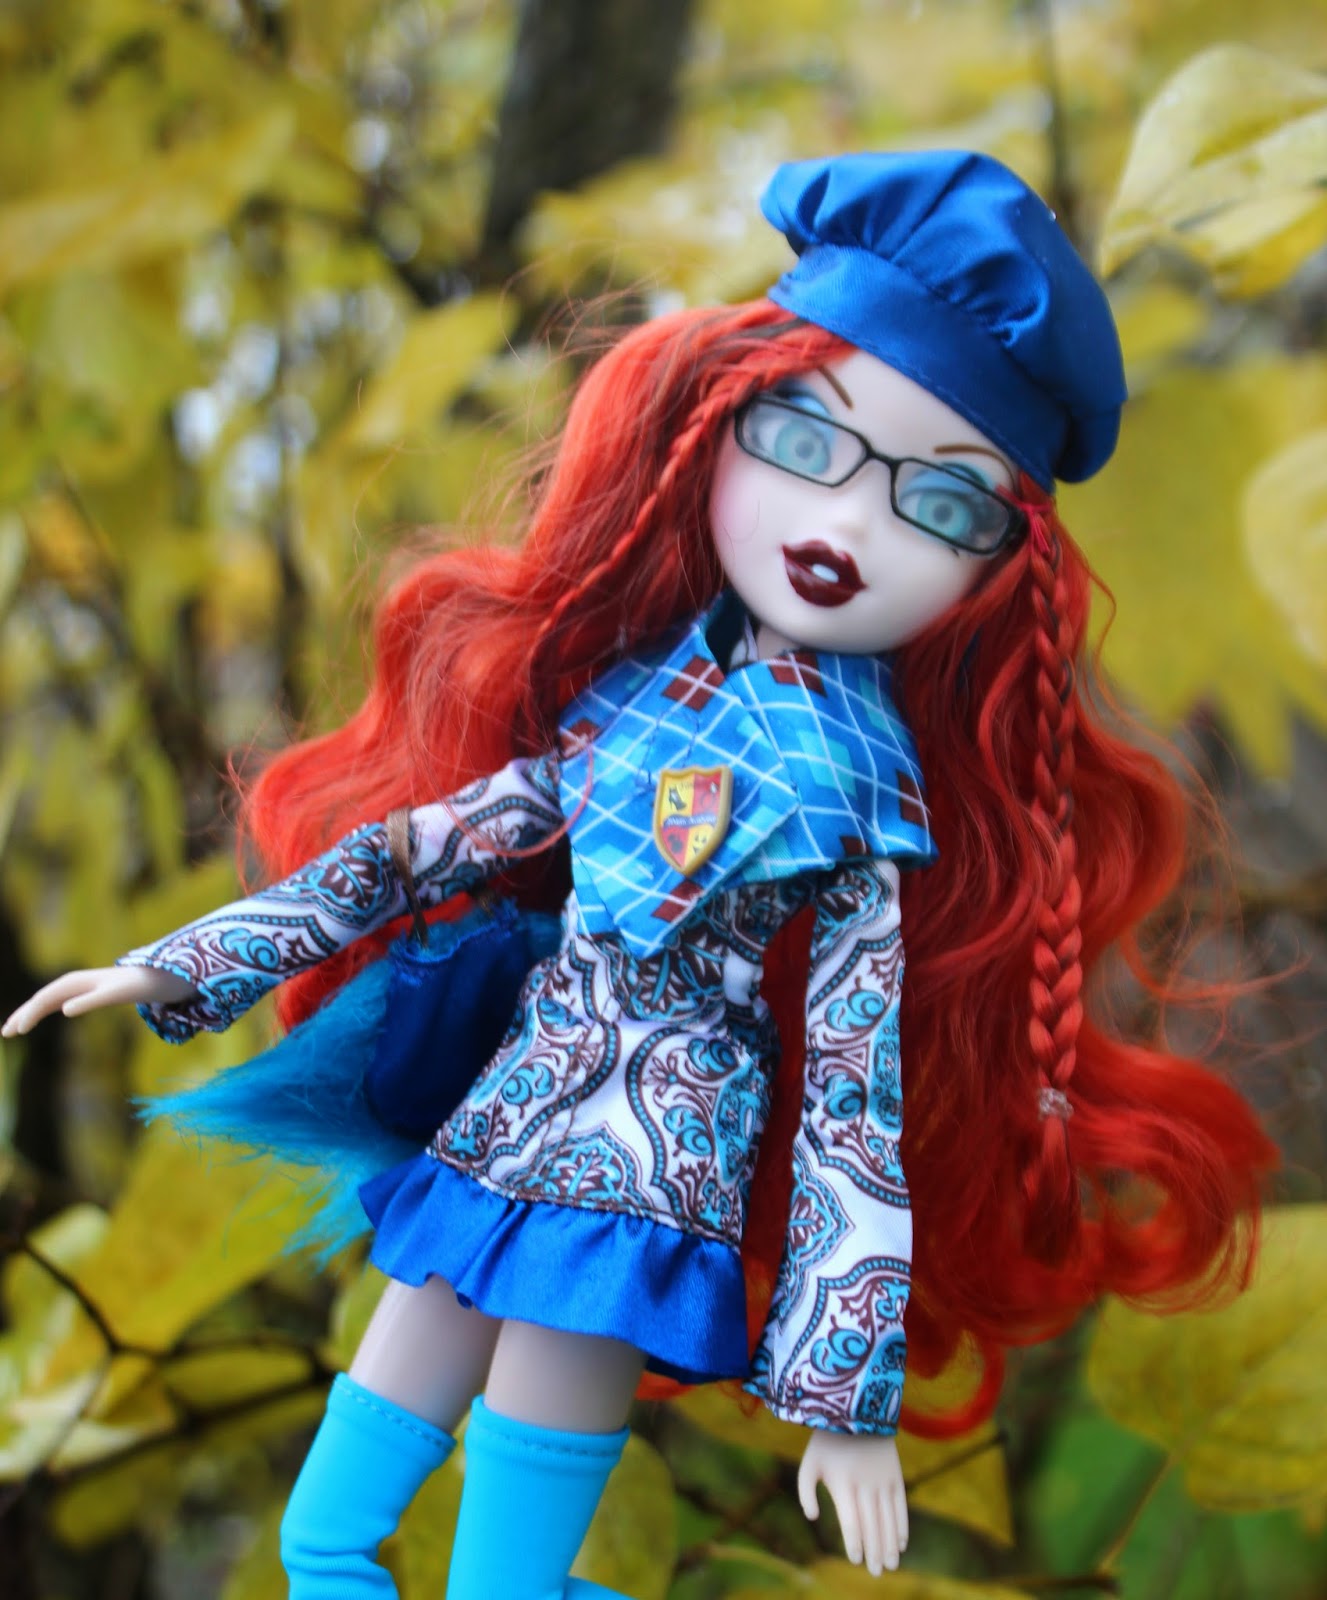 PLANET OF THE DOLLS: Doll-A-Day 276: Meygana Broomstix